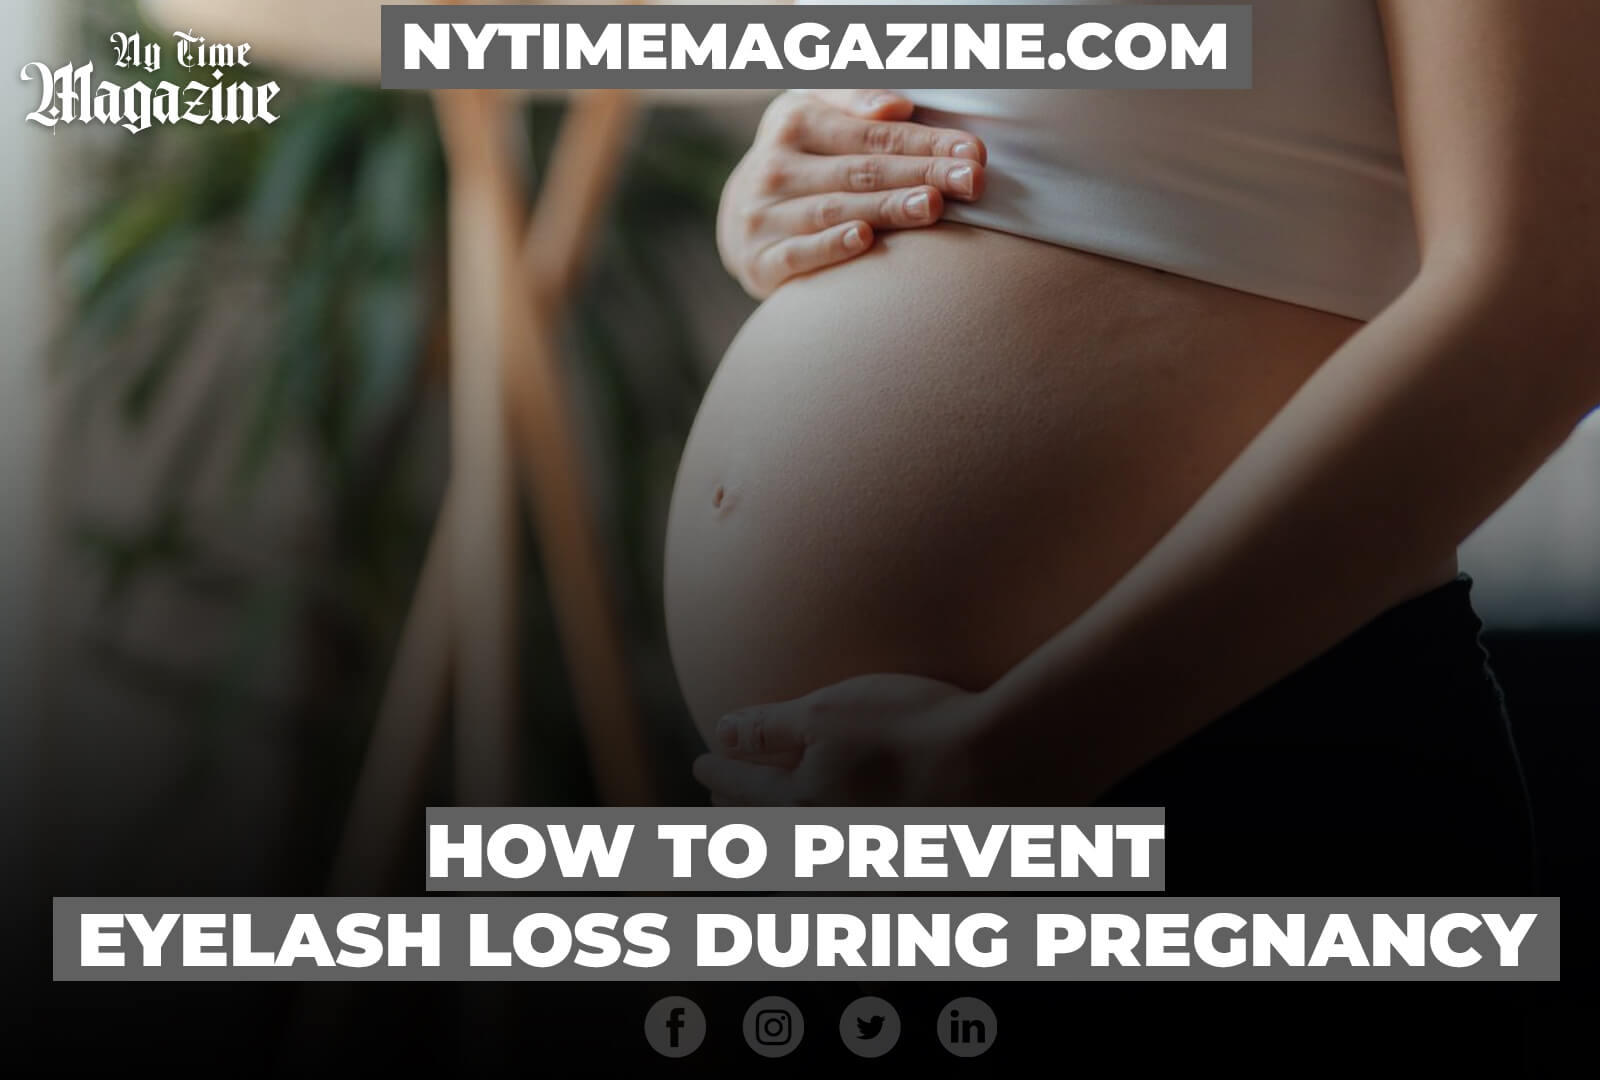 HOW TO PREVENT EYELASH LOSS DURING PREGNANCY